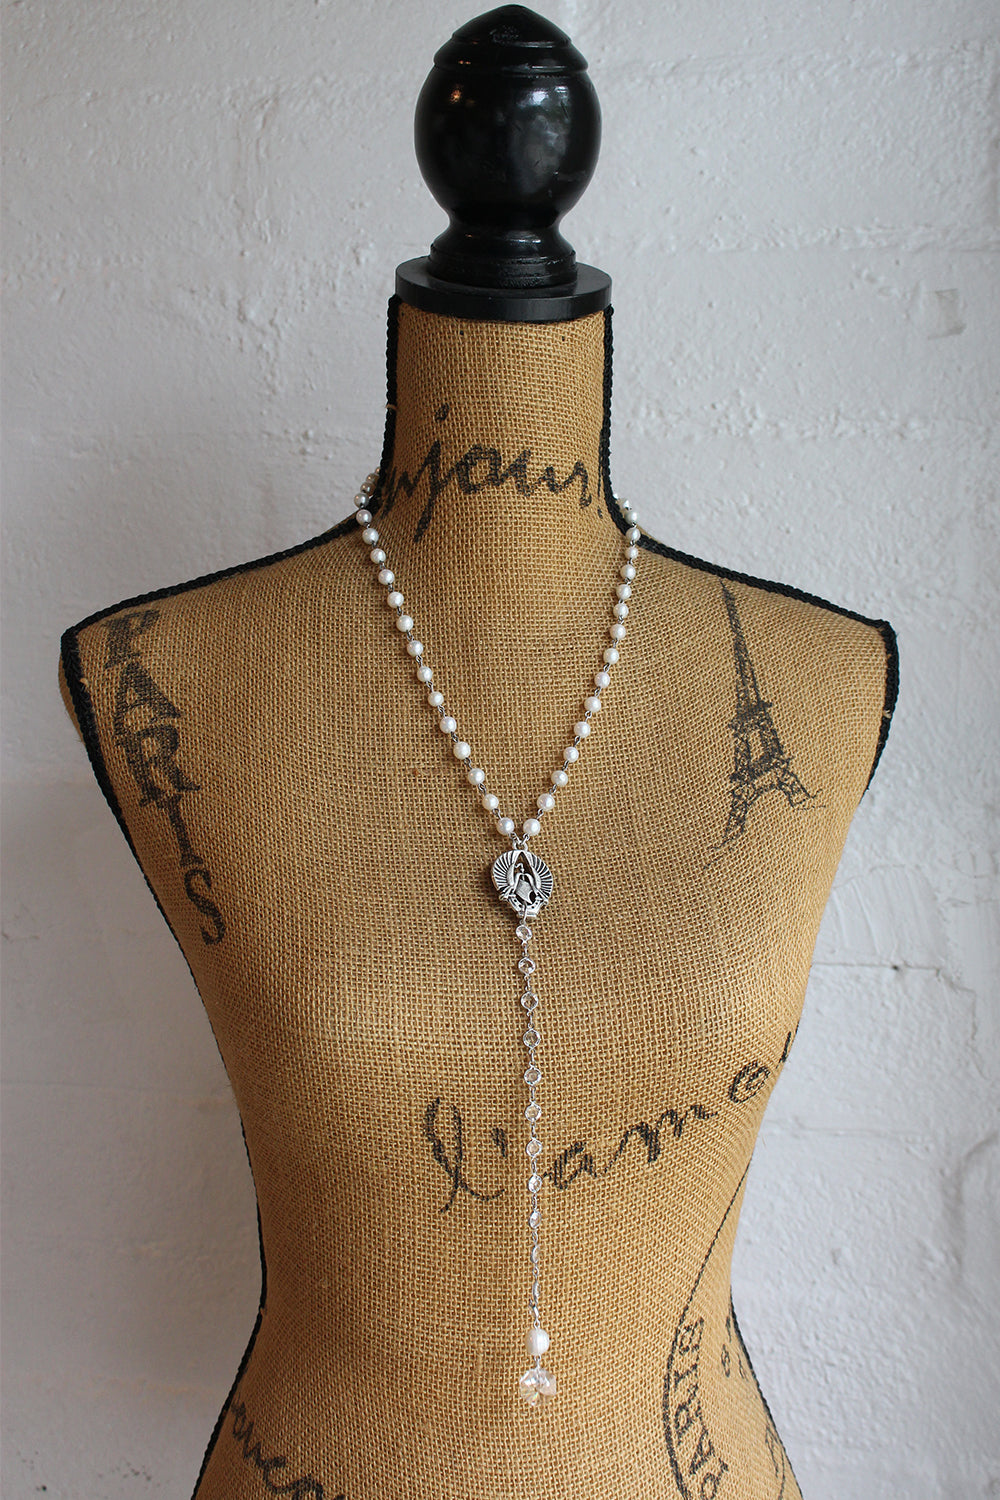 PEARLS AND AUSTRIAN CRYSTAL WITH DOVES PENDANTS